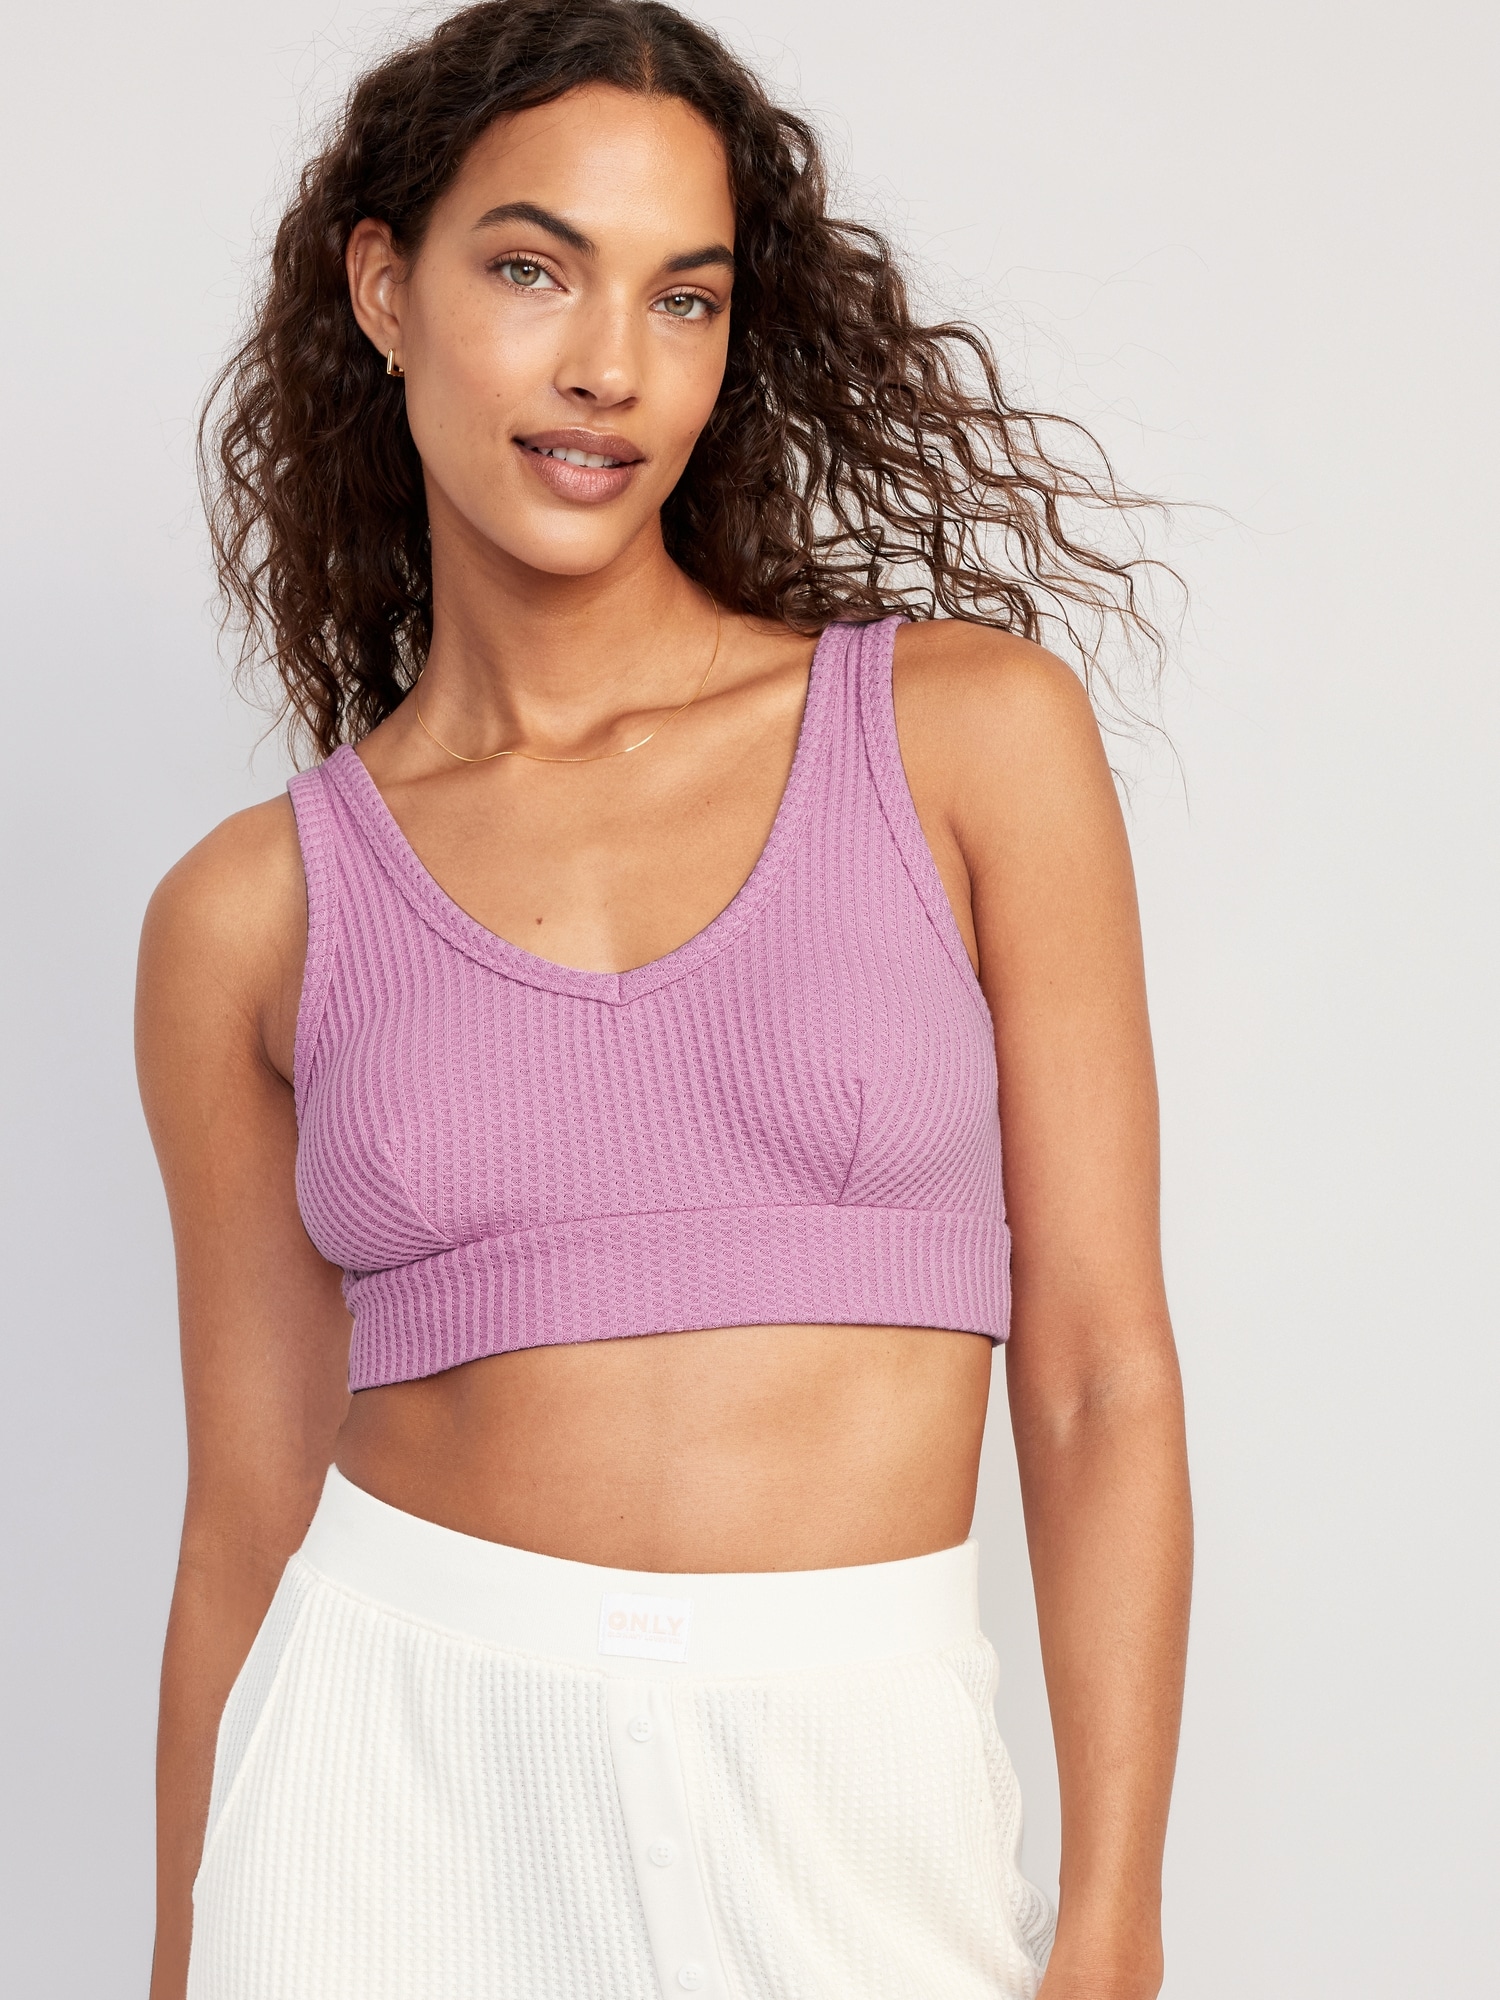 Comfre Built In Bra Camisole Top – Hey Babe